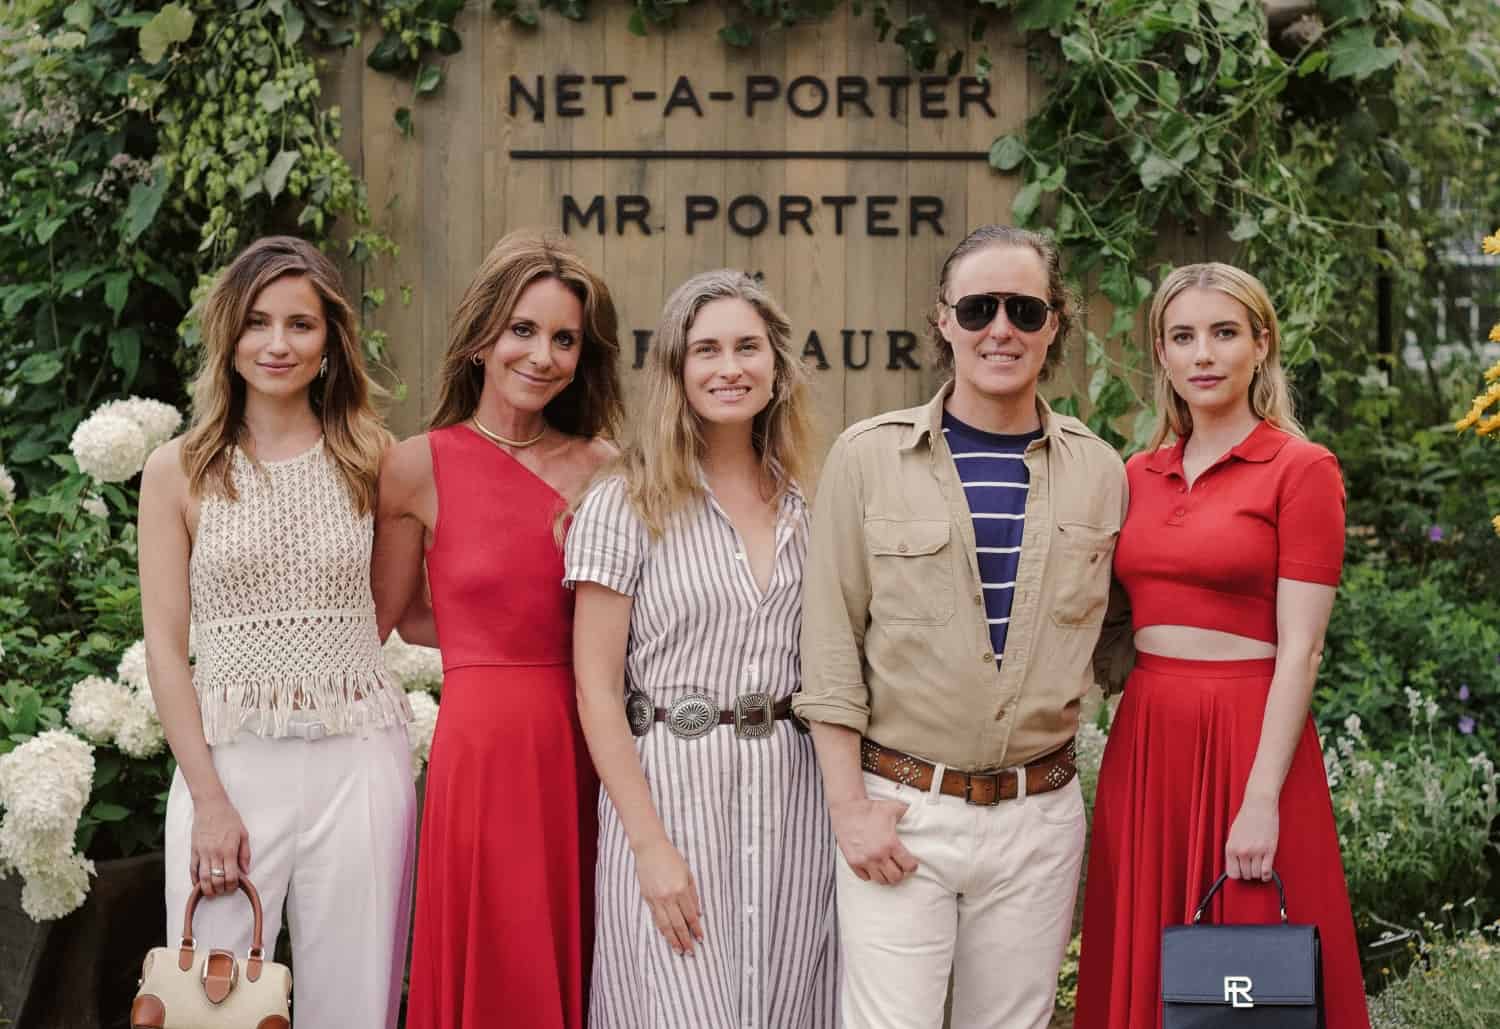 Ralph Lauren, Net-a-Porter, And Mr. Porter Hosted A Barn Dinner With A Difference In East Hampton